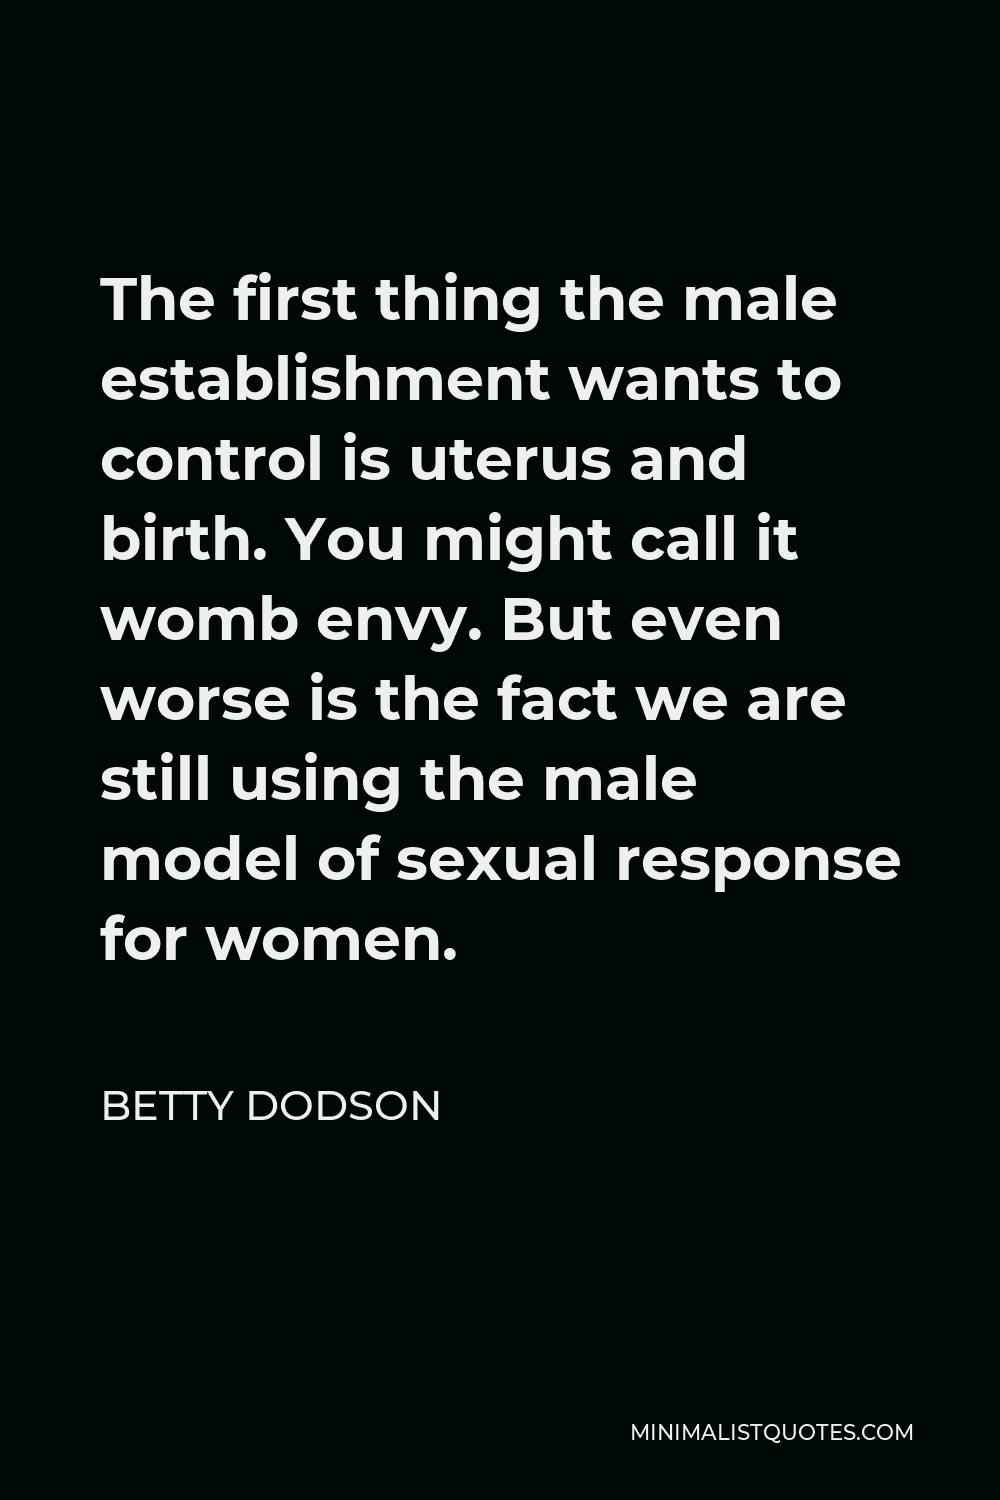 Betty Dodson Quote - The first thing the male establishment wants to control is uterus and birth. You might call it womb envy. But even worse is the fact we are still using the male model of sexual response for women.